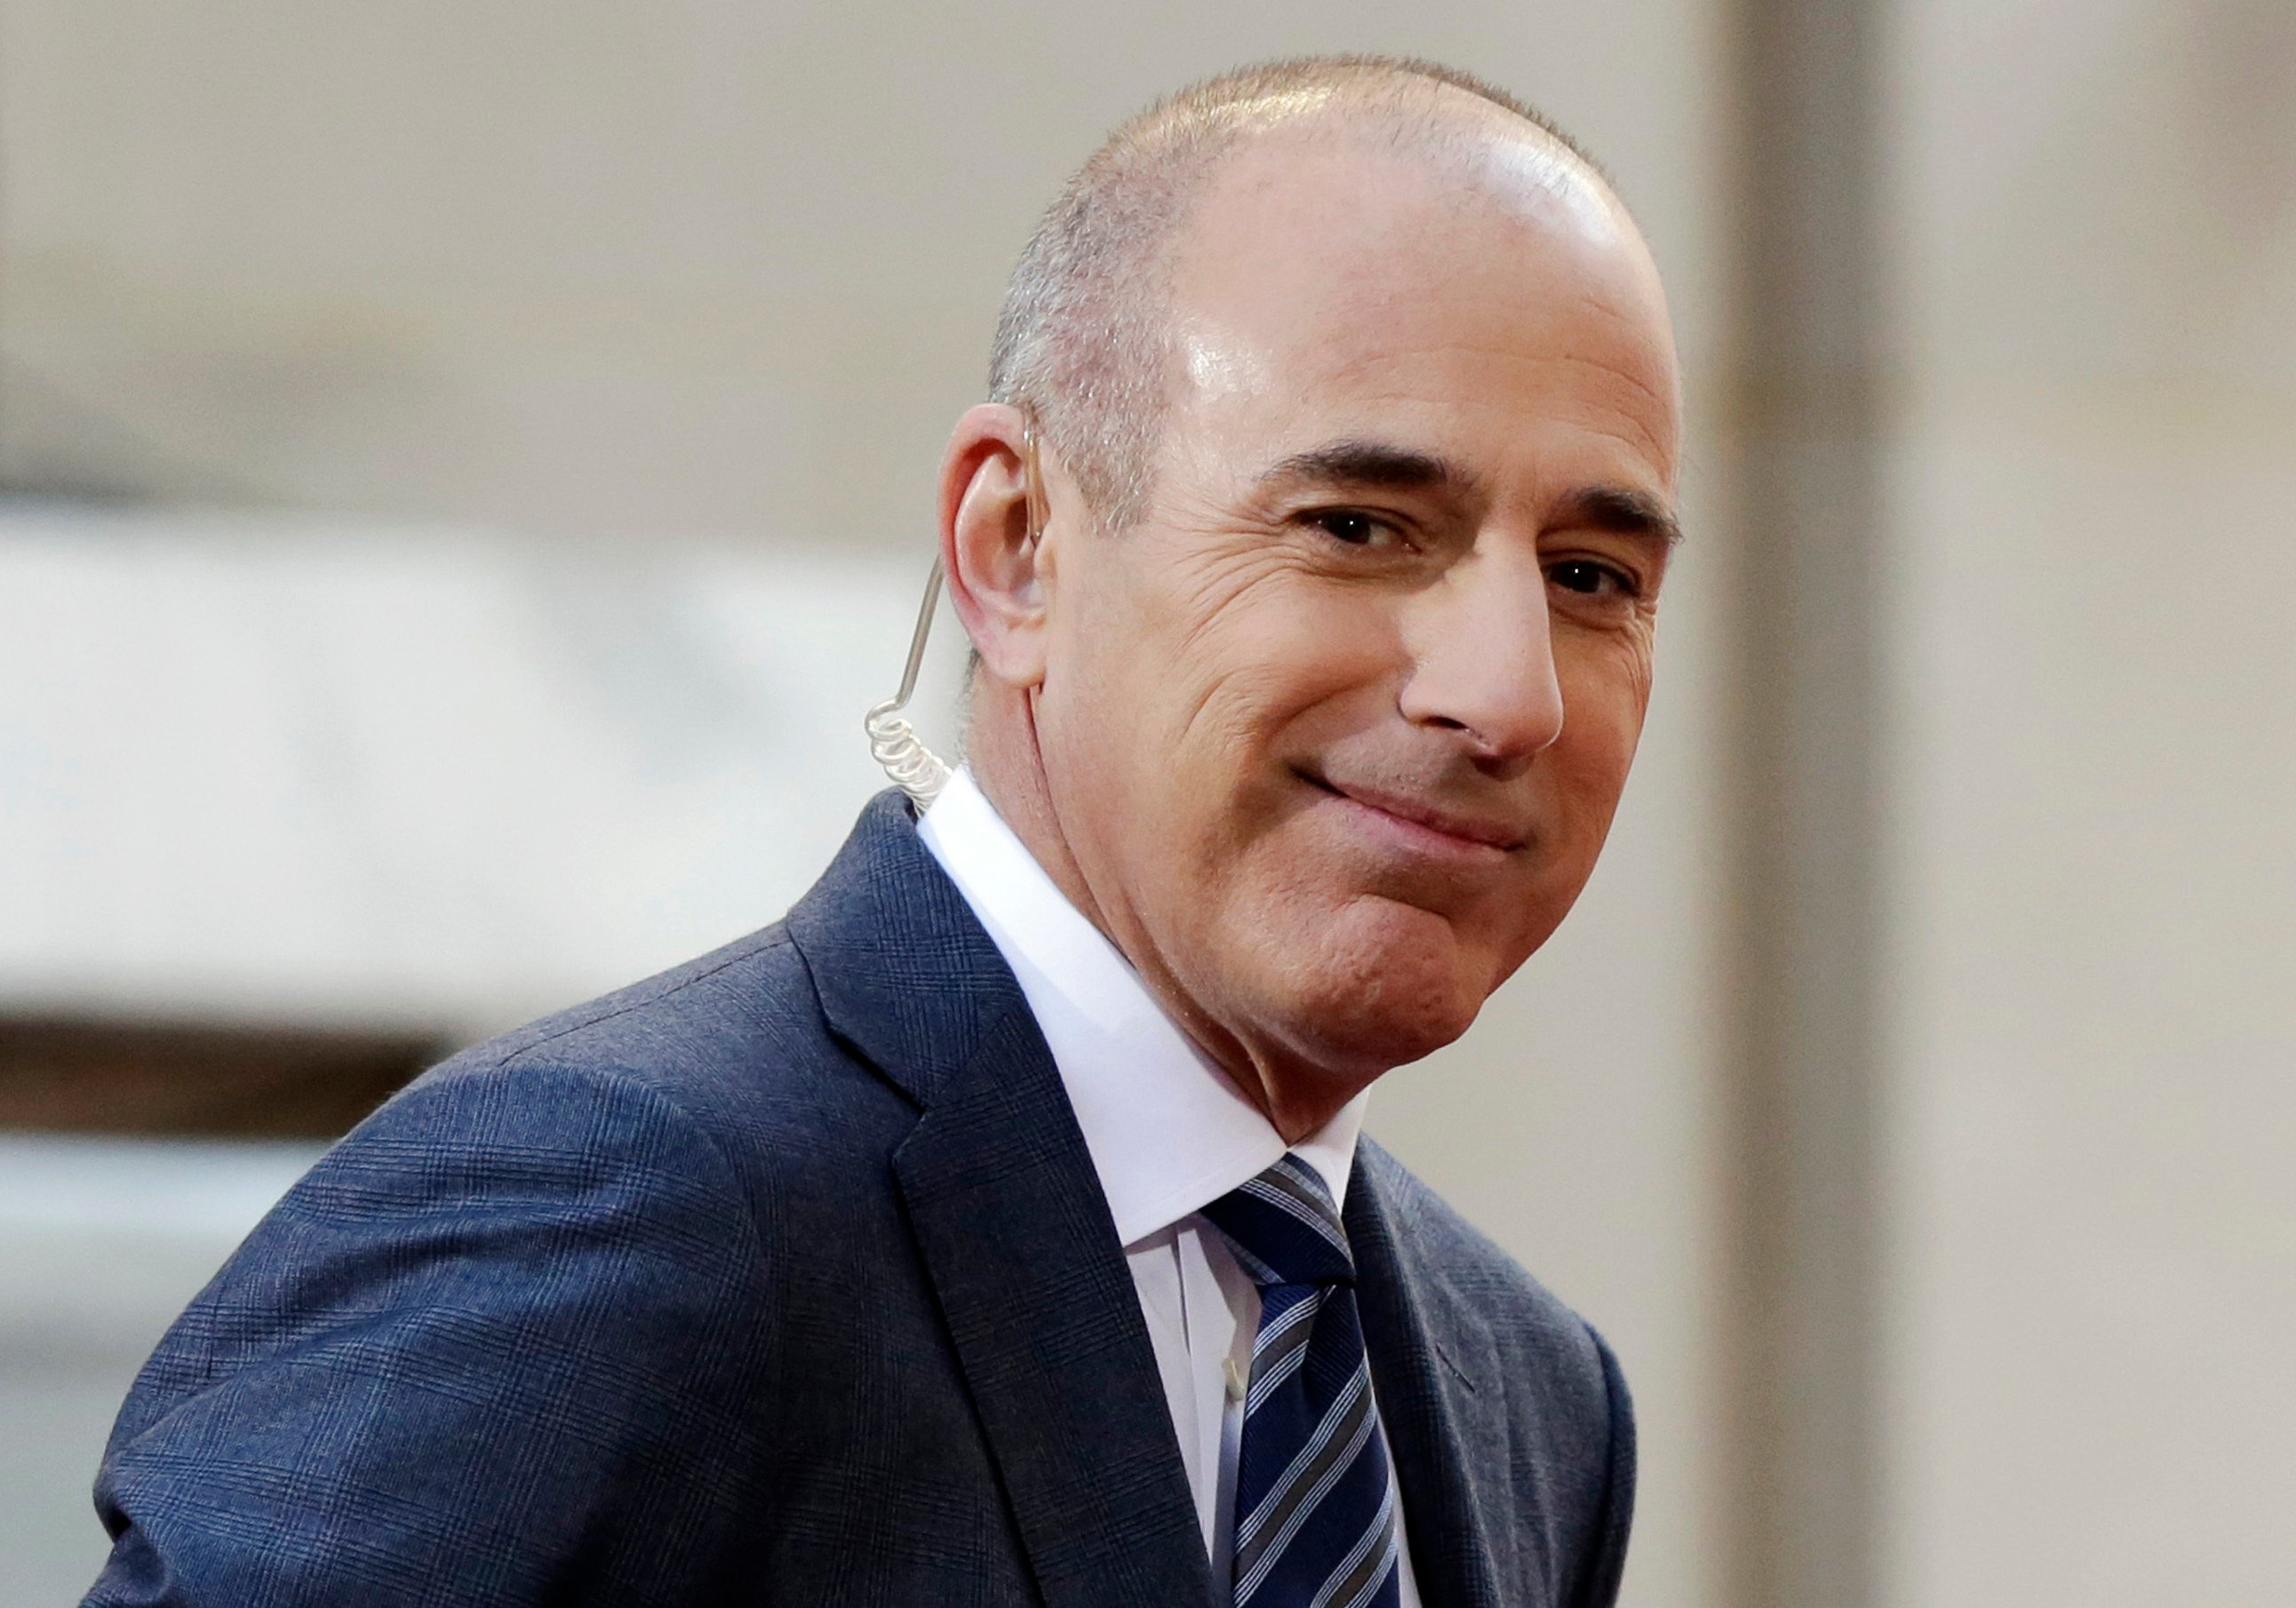 Matt Lauer, co-host of the NBC’s Today show, was fired in 2017 for inappropriate sexual behavior. Photo: AP